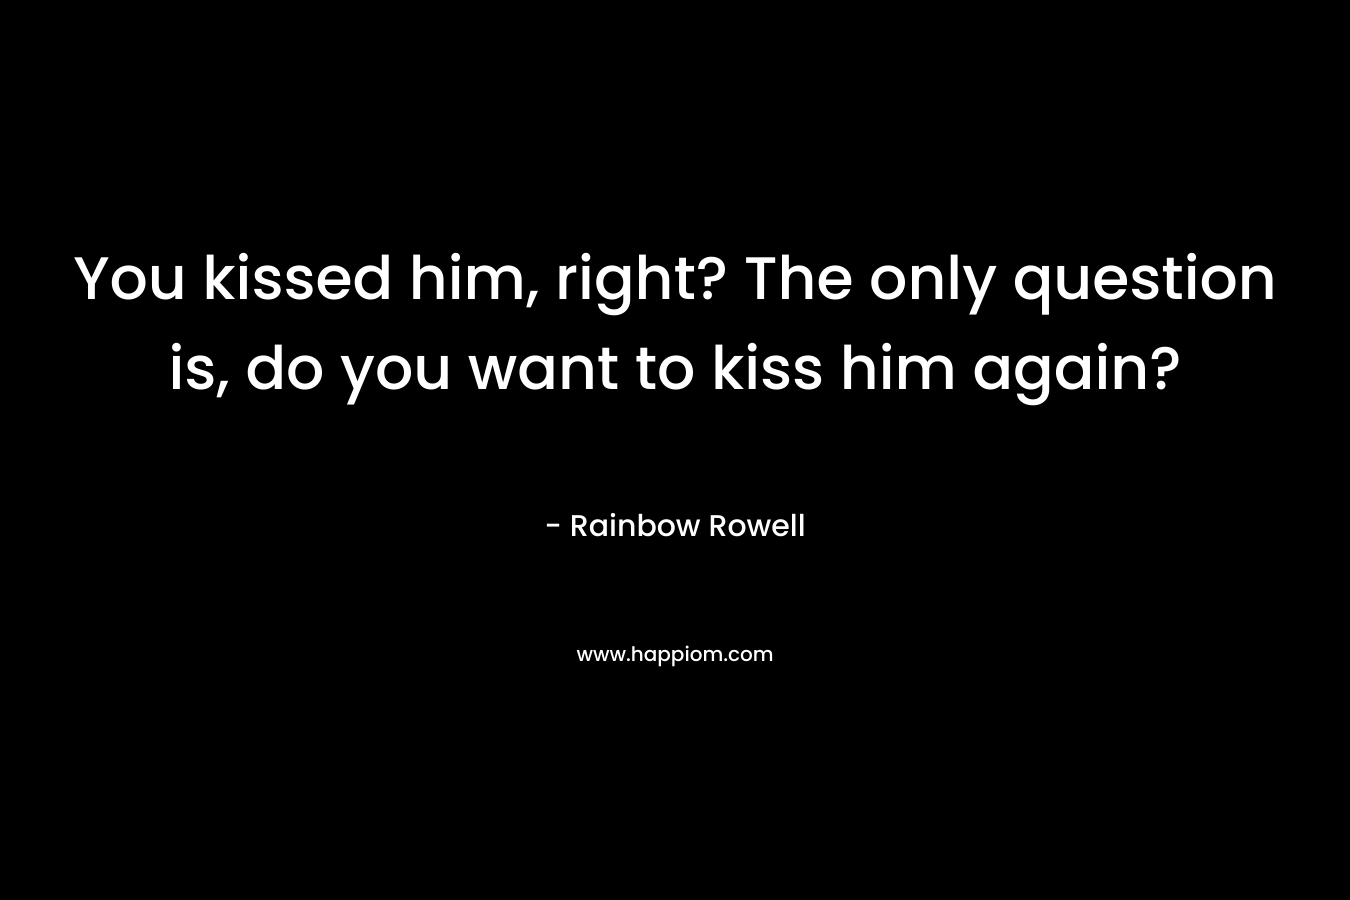 You kissed him, right? The only question is, do you want to kiss him again?